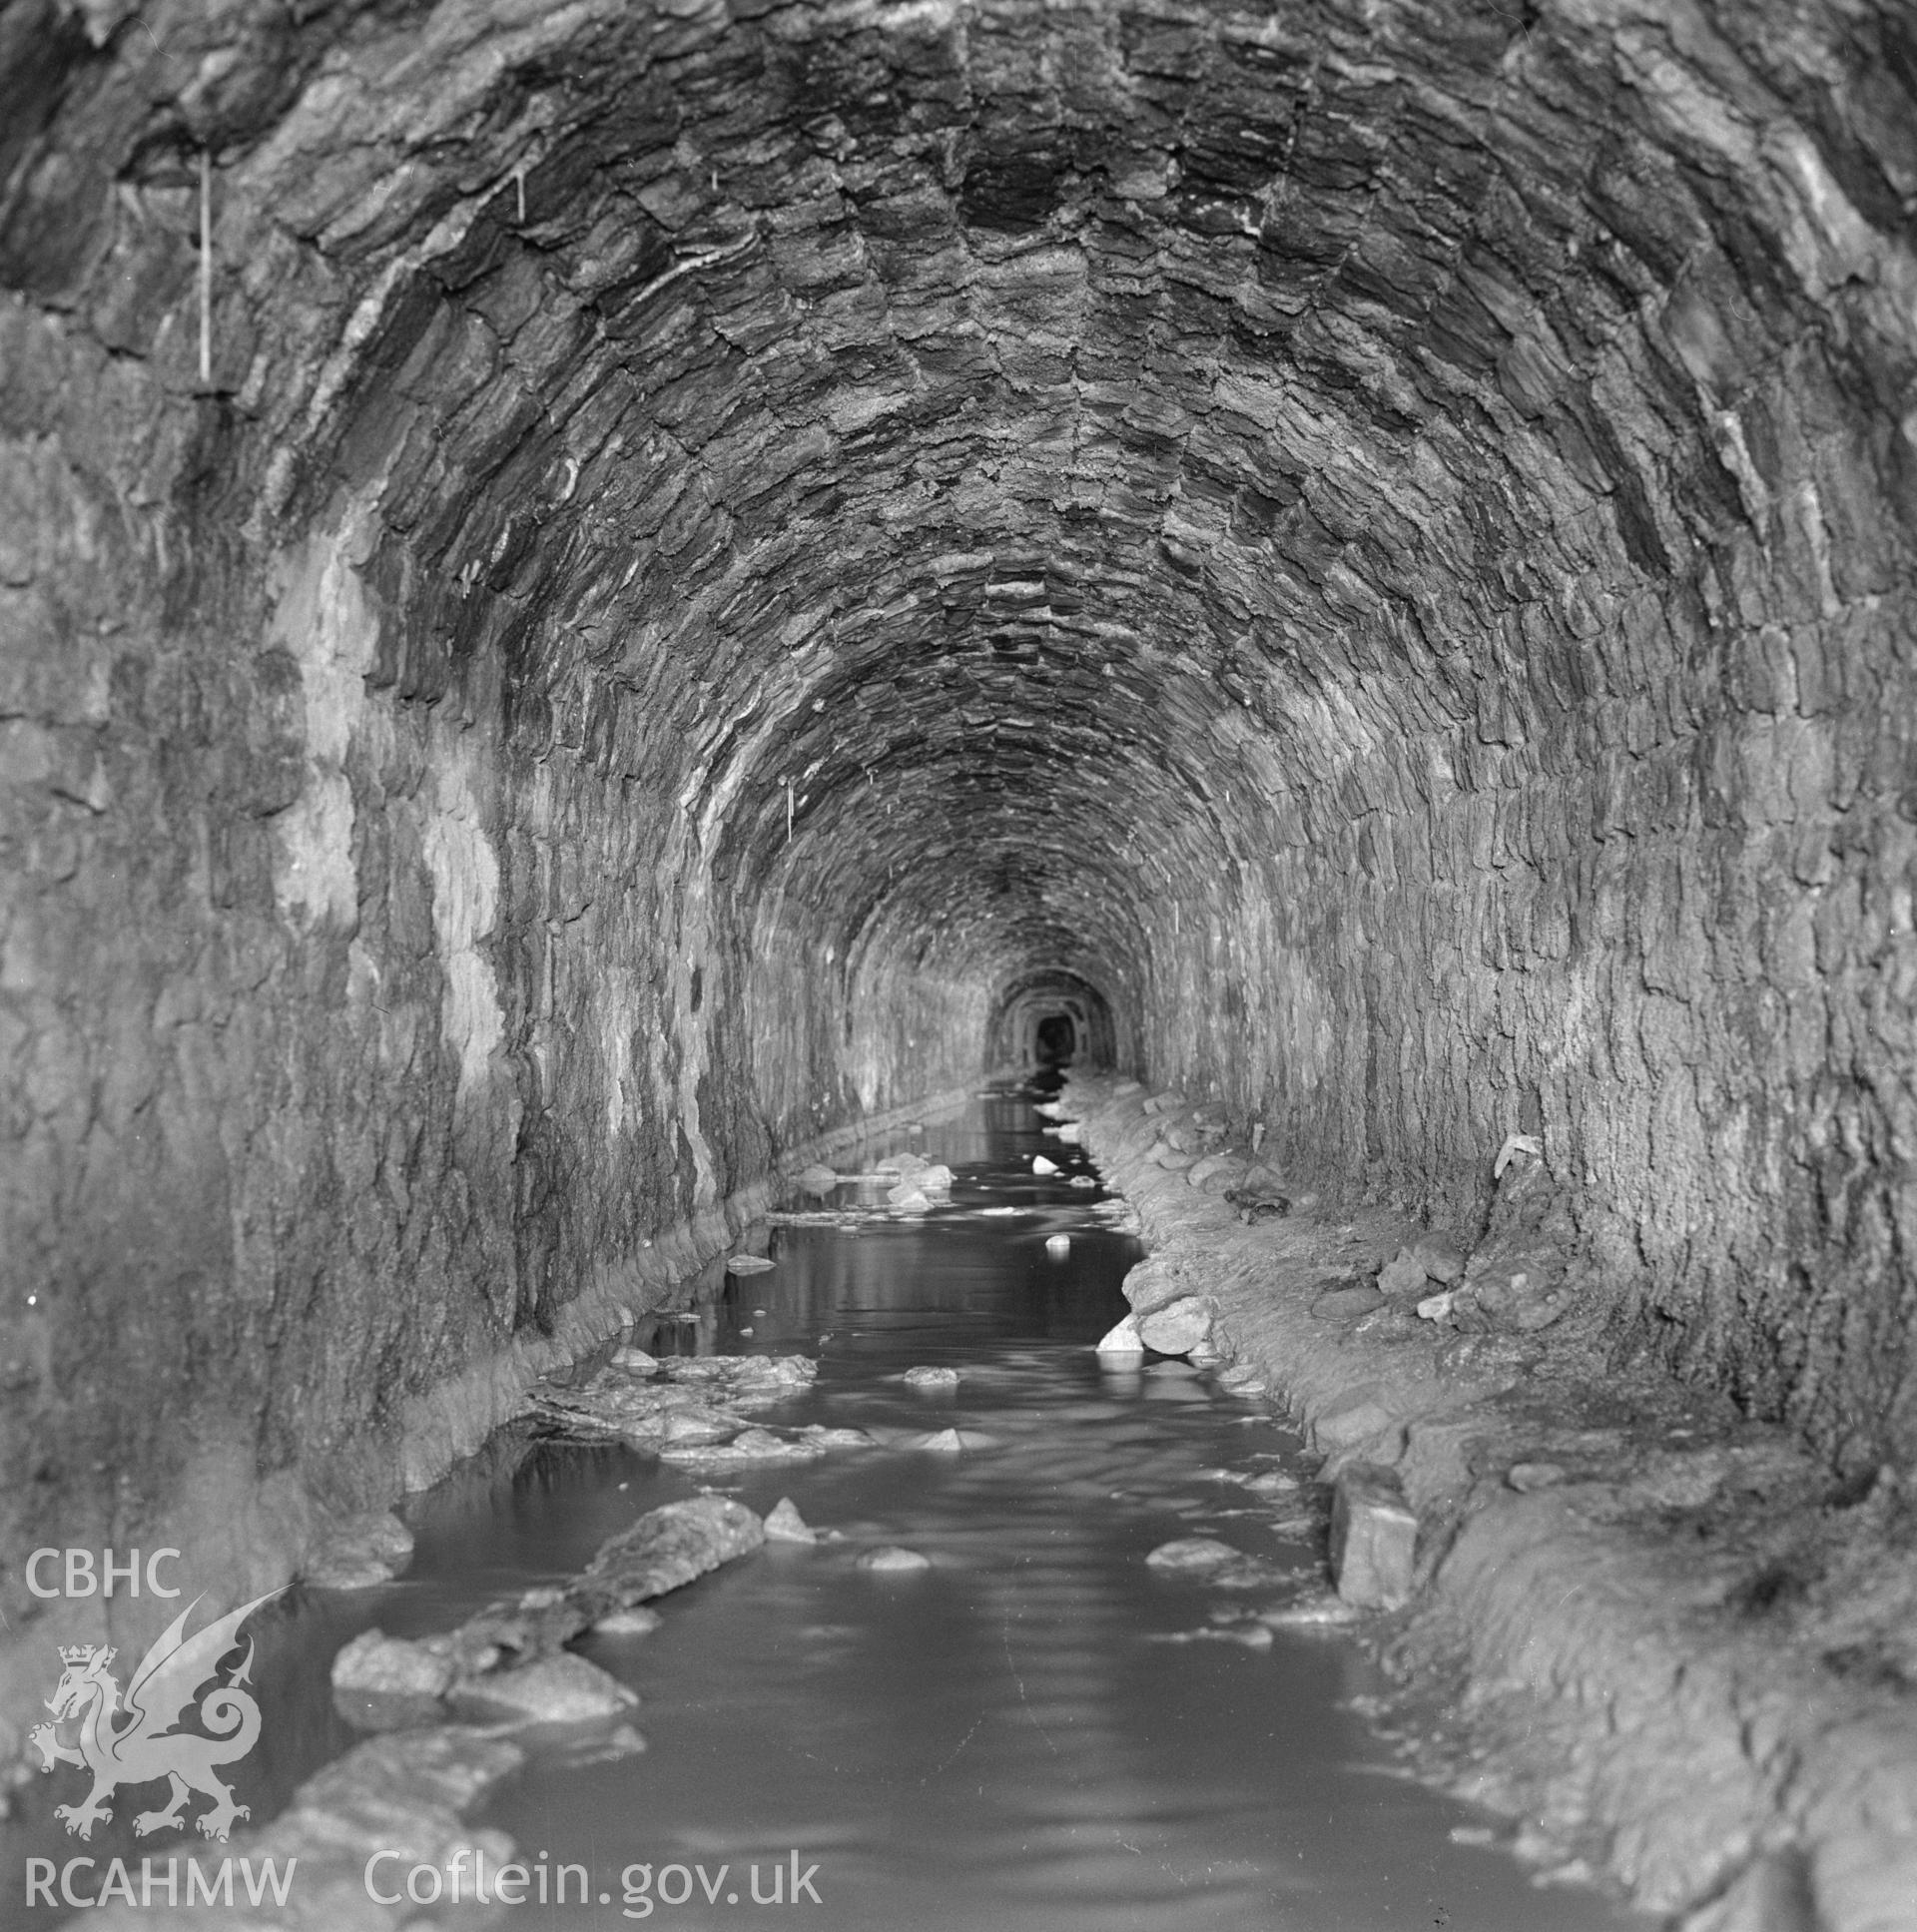 Digital copy of an acetate negative showing general view of pit head at Big Pit, from the John Cornwell Collection.